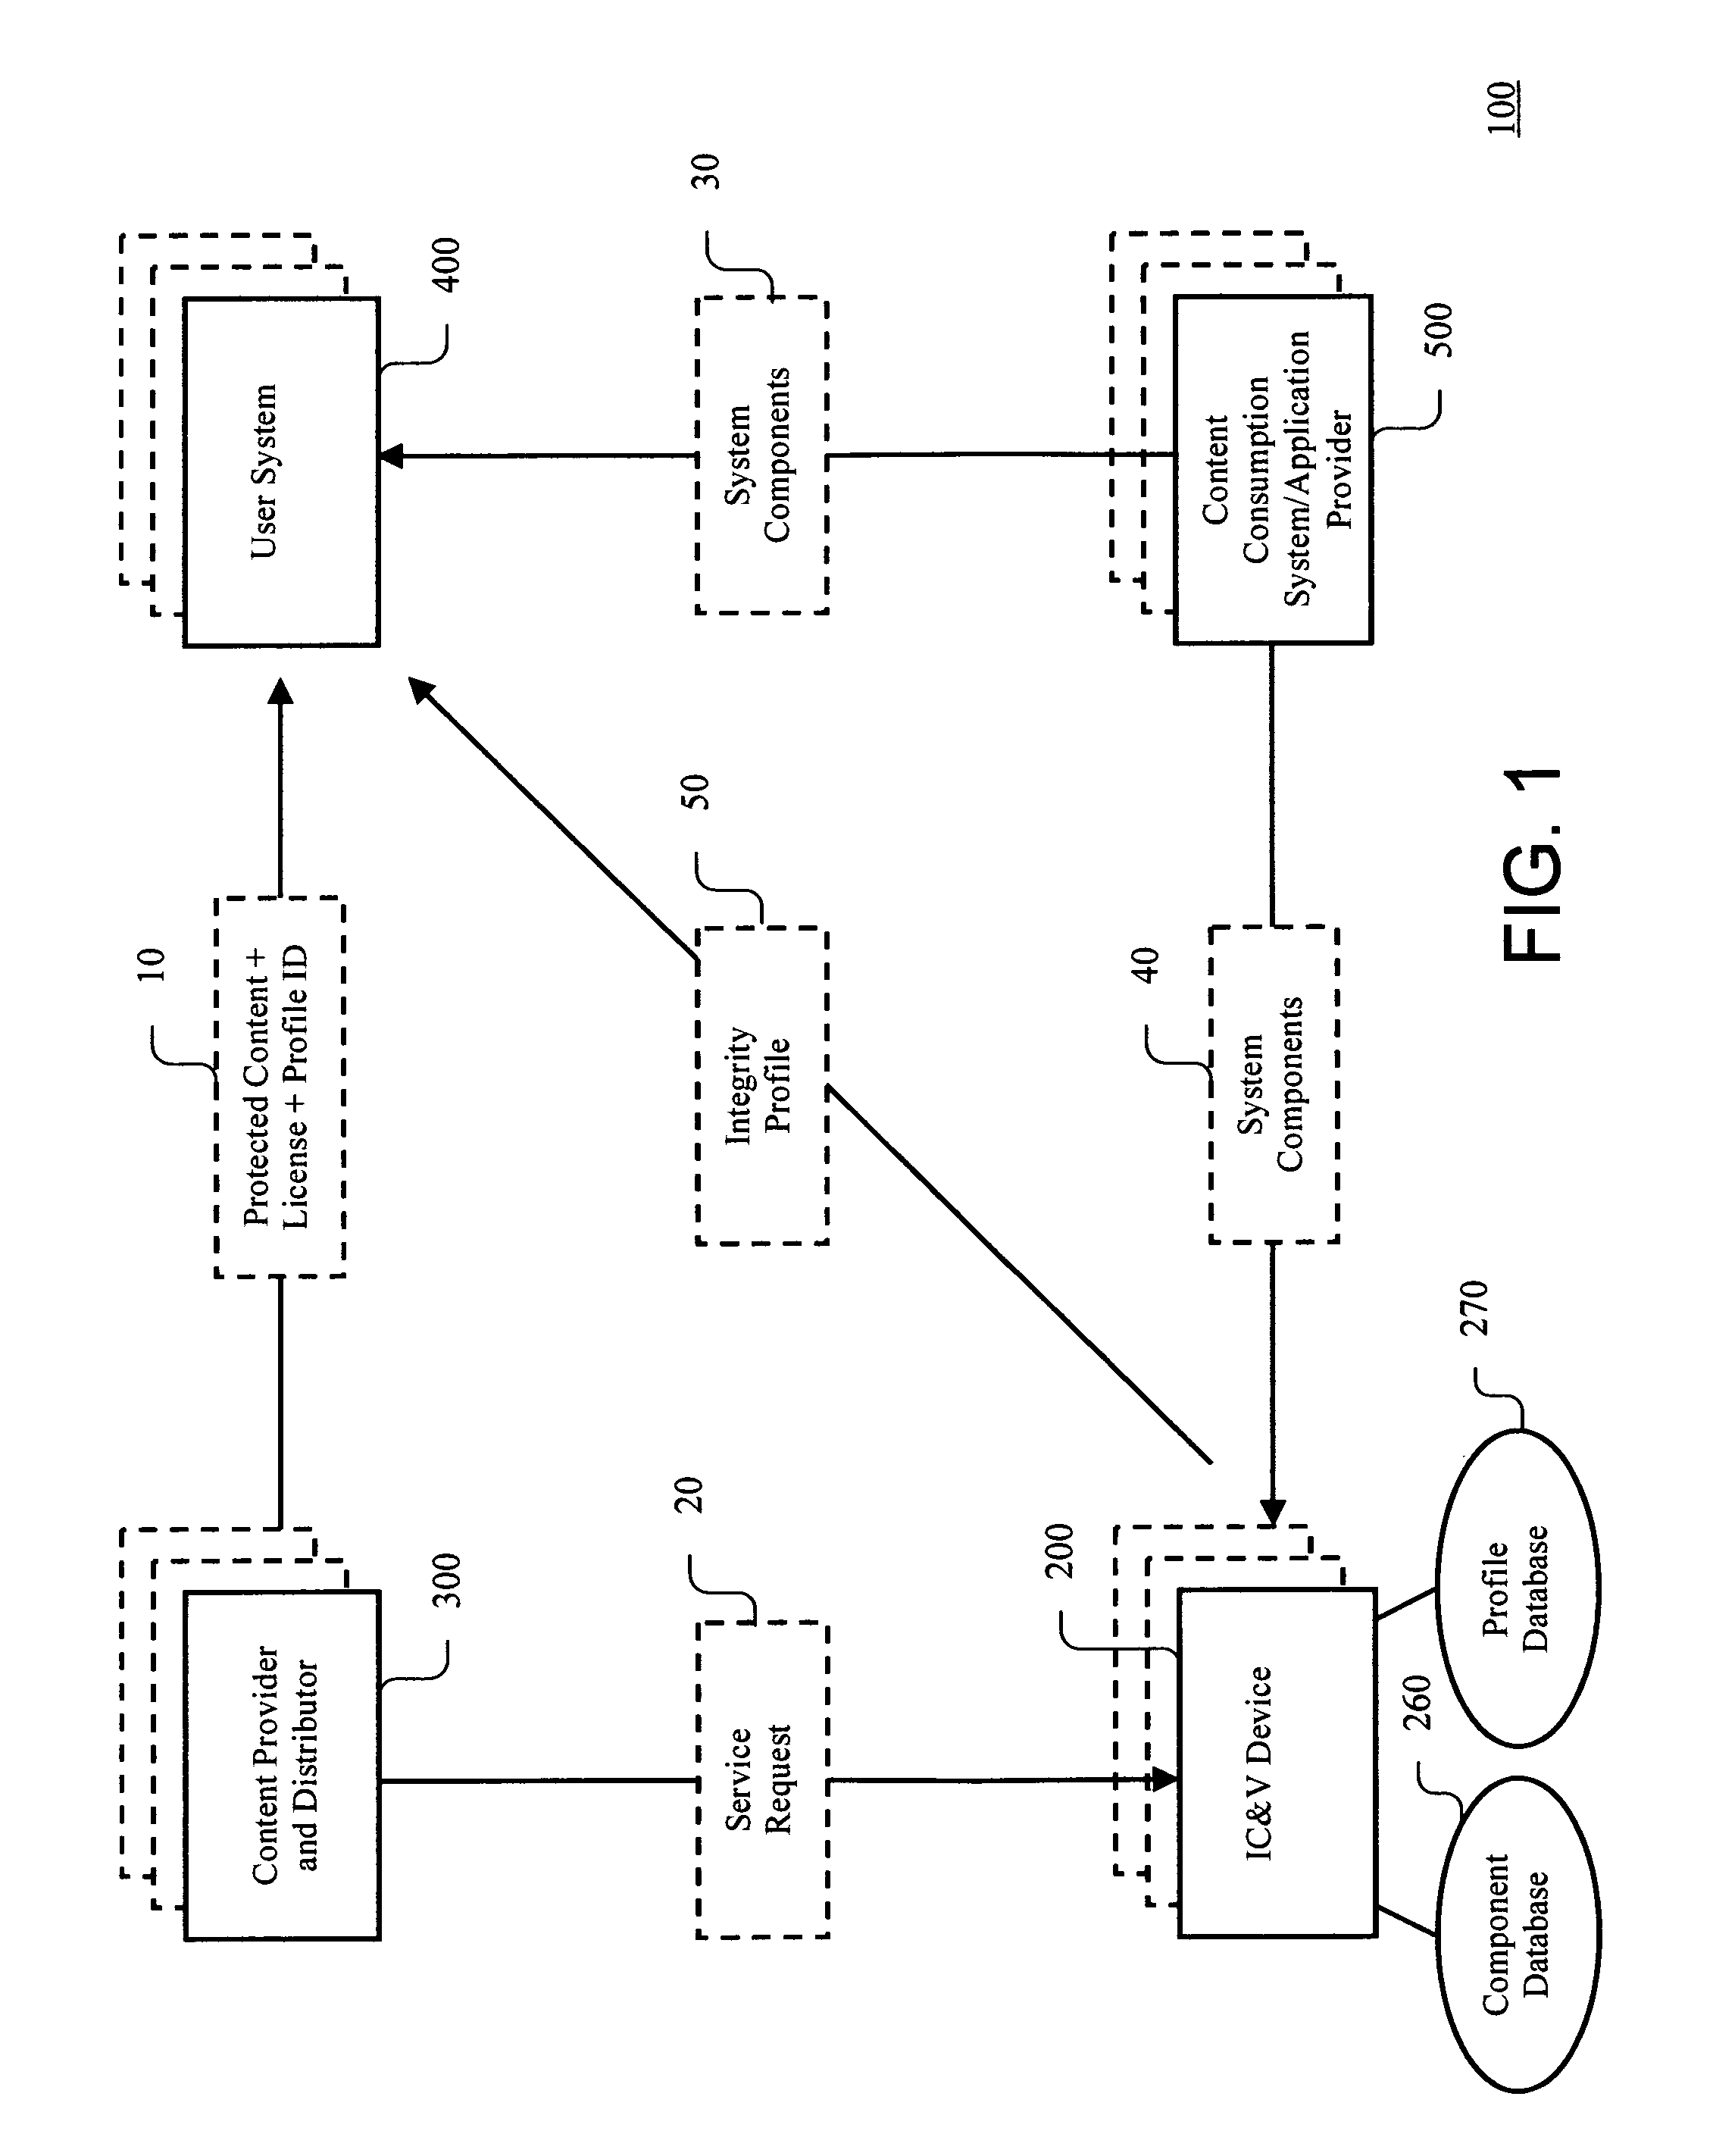 Systems and methods for integrity certification and verification of content consumption environments